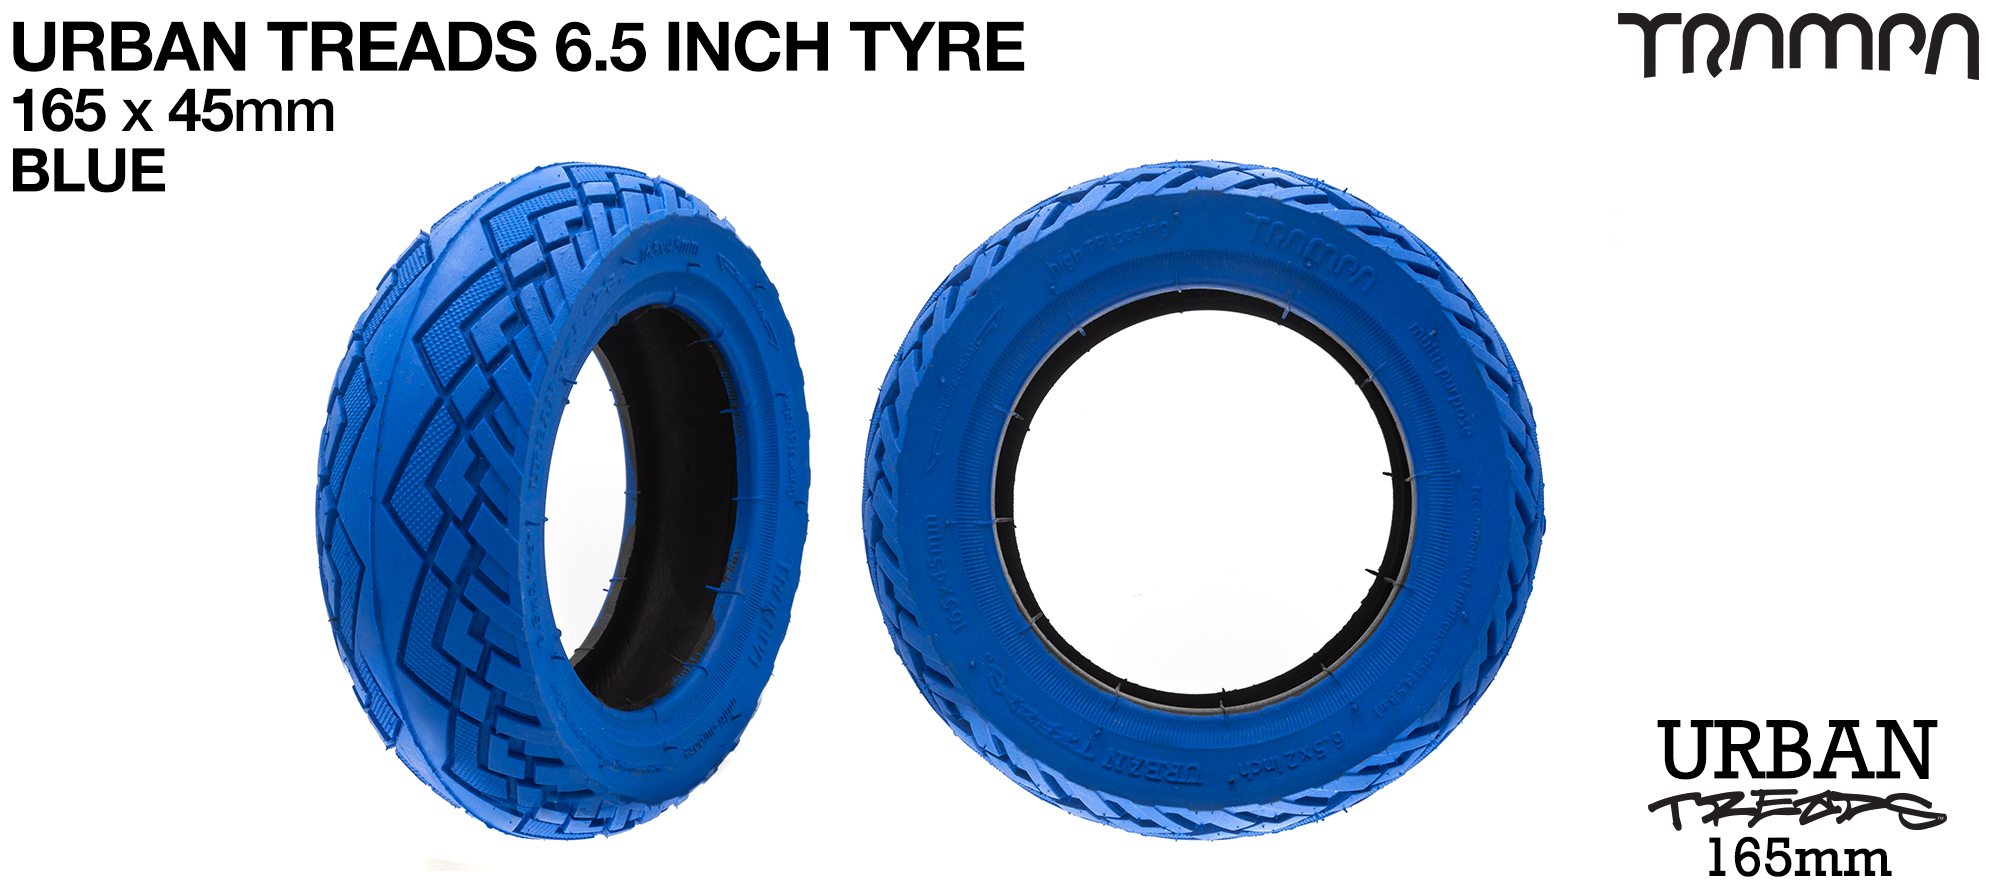 6.5 Inch Tyre TRAMPA URBAN TREADS is the perfect all round tyre for Urban & City riding - BLUE 